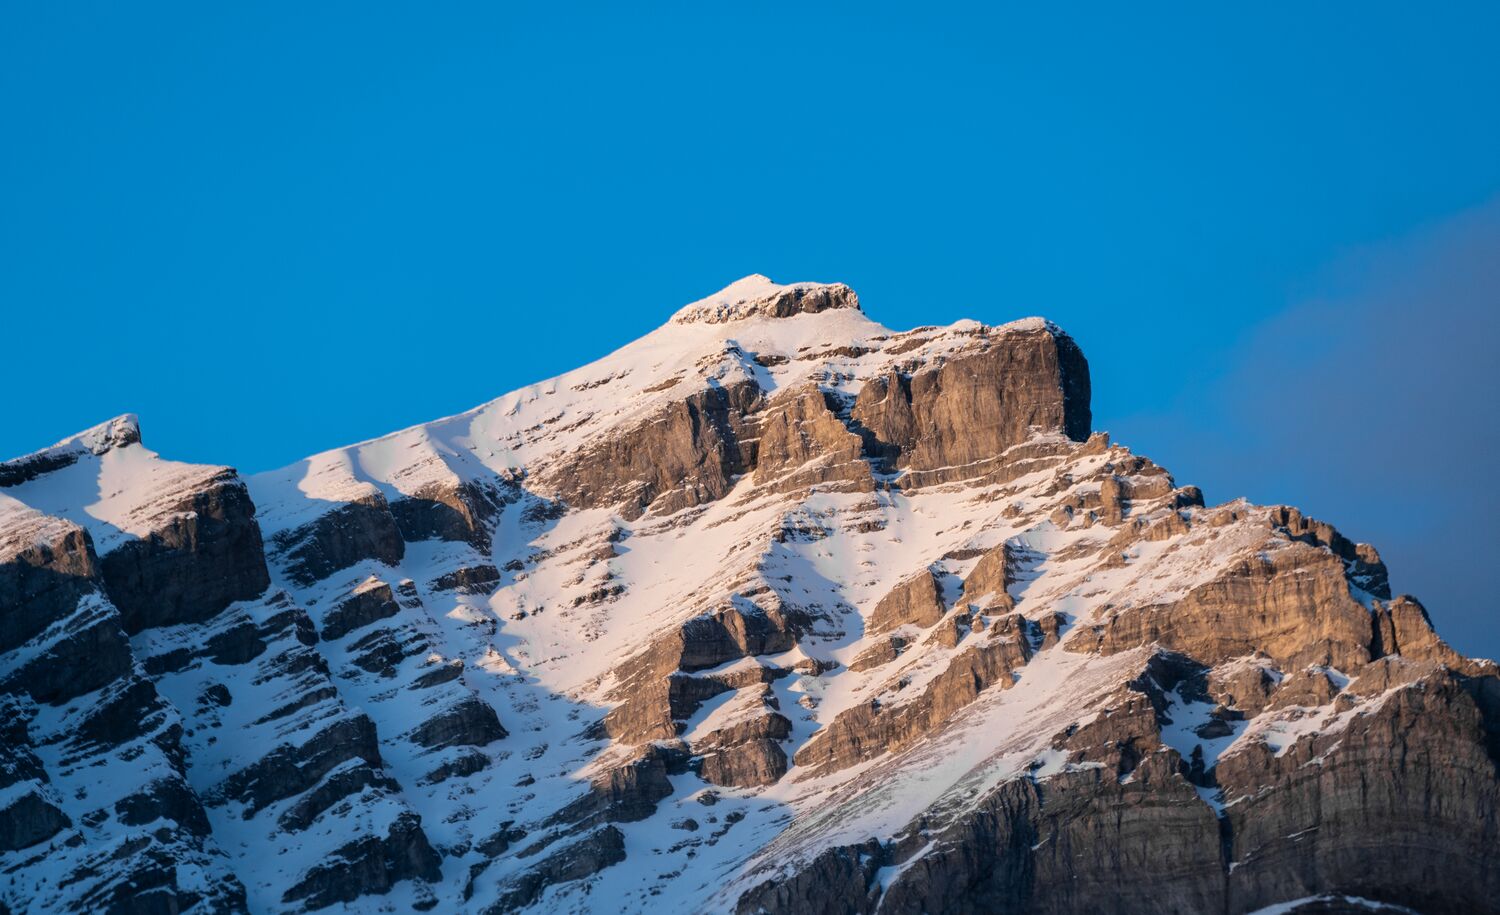 The peak of Cascade Mountain as touched by the light at sunrise in Banff National Park.